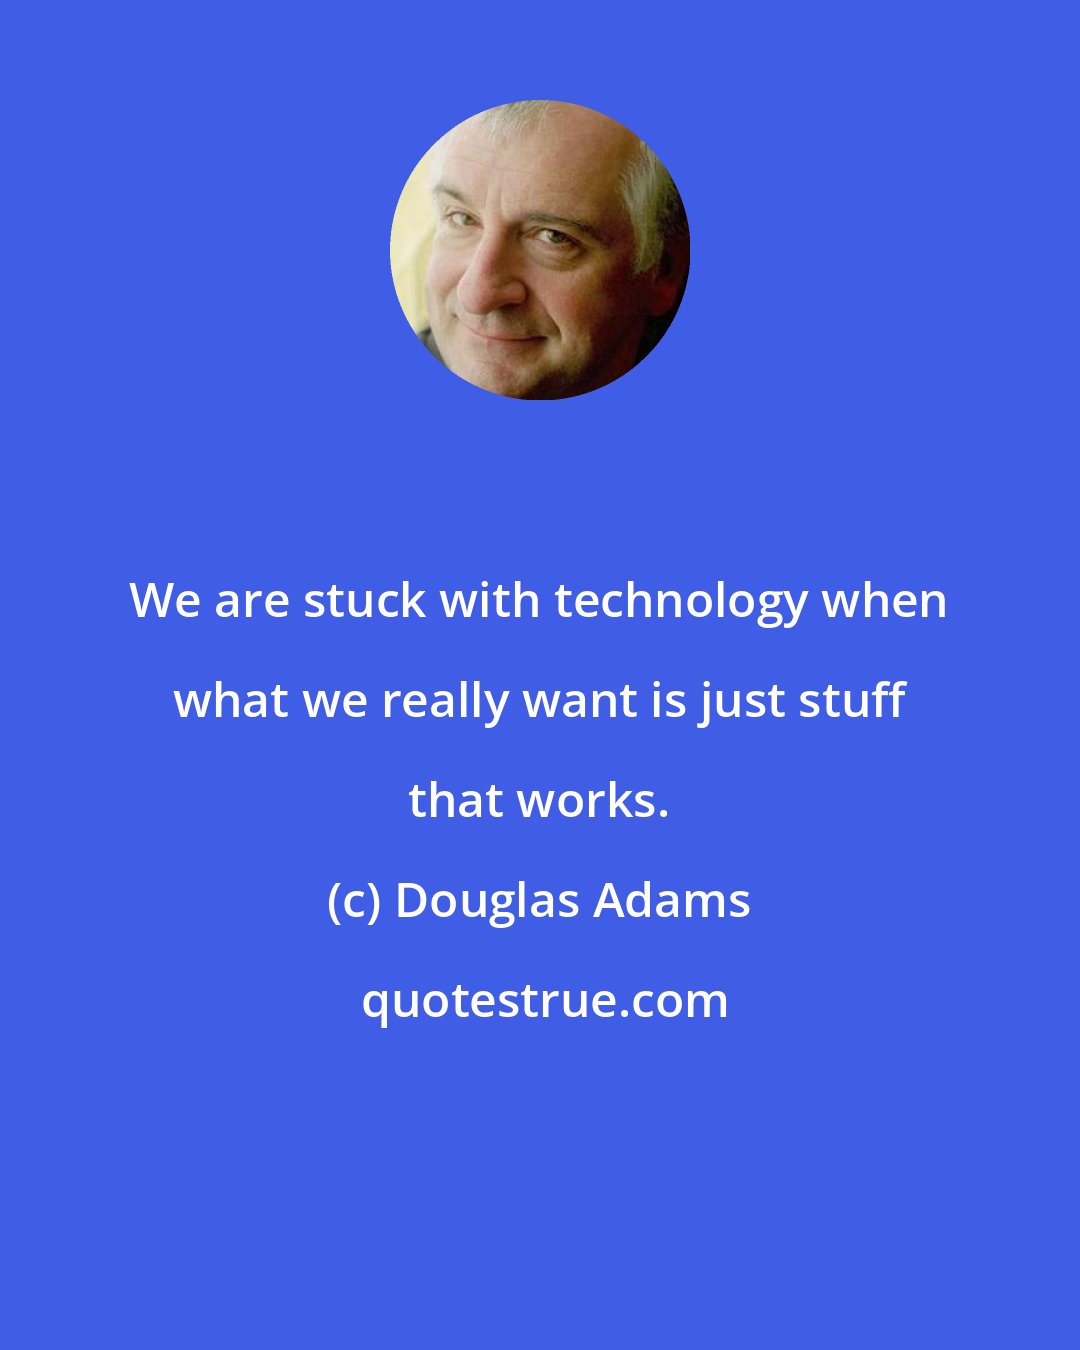 Douglas Adams: We are stuck with technology when what we really want is just stuff that works.